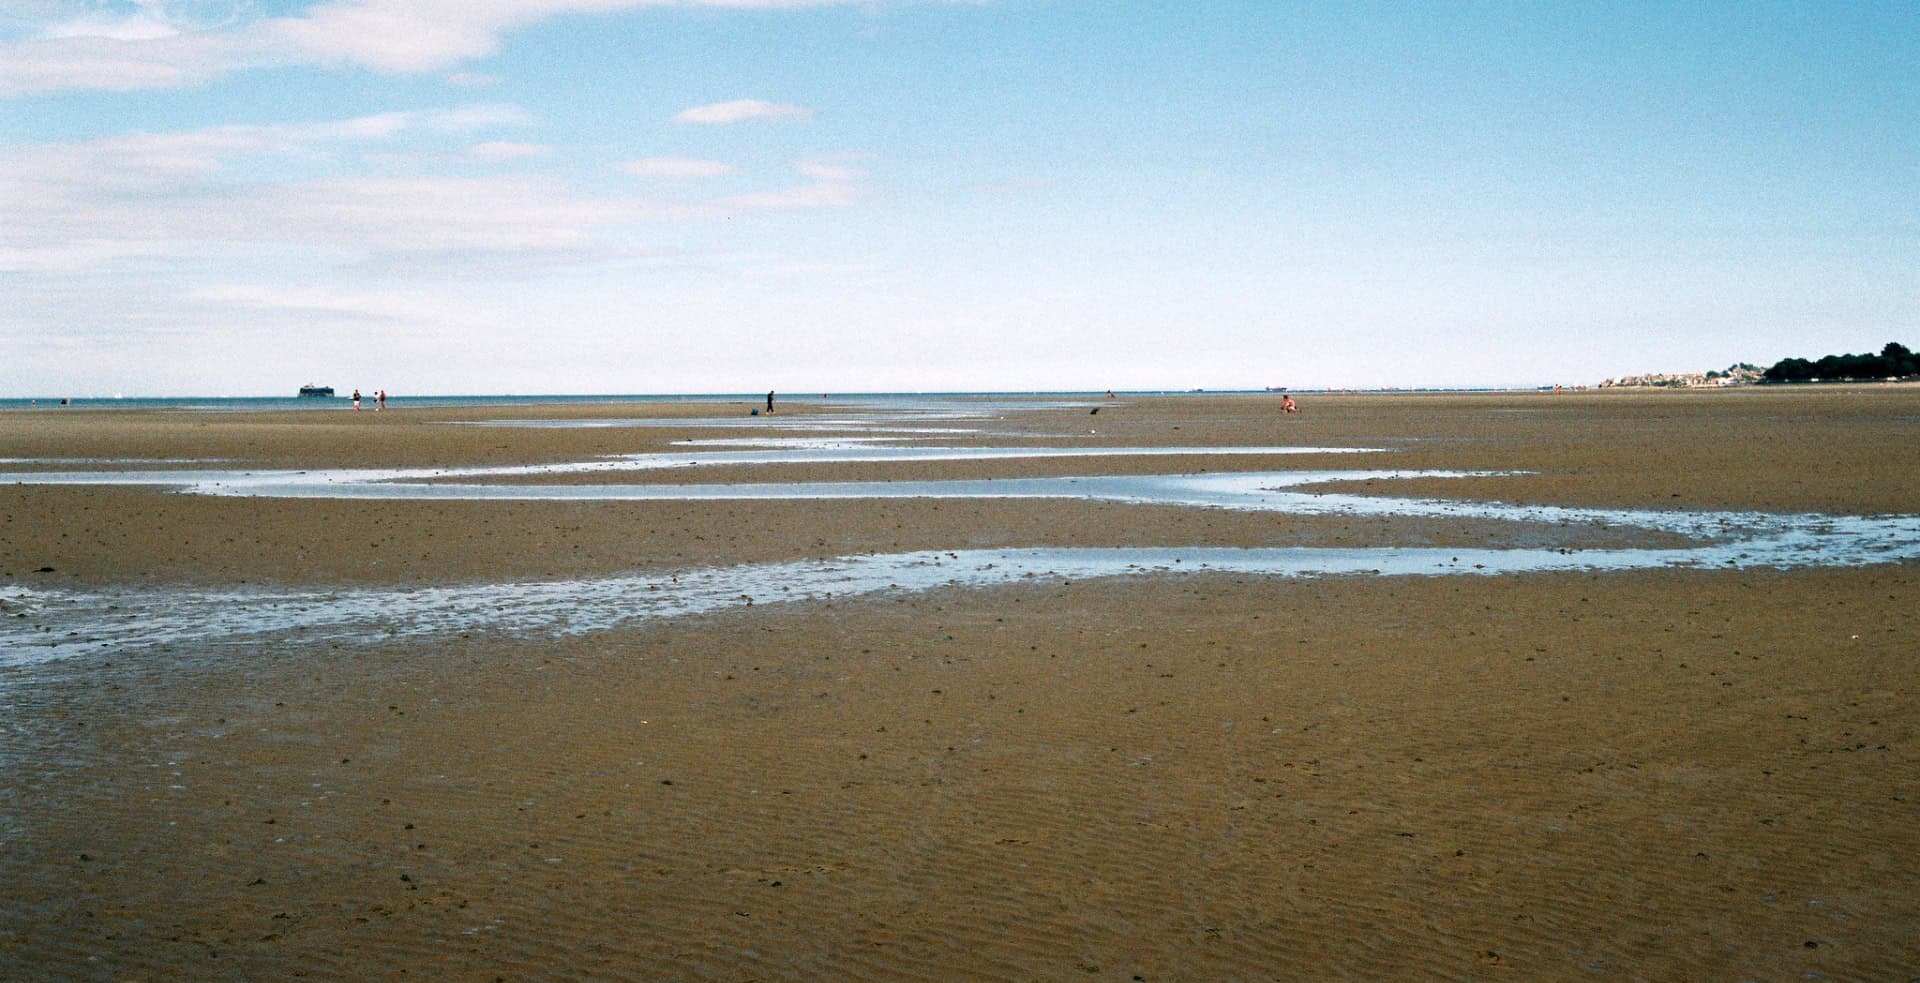 low tide sands at ryde beach